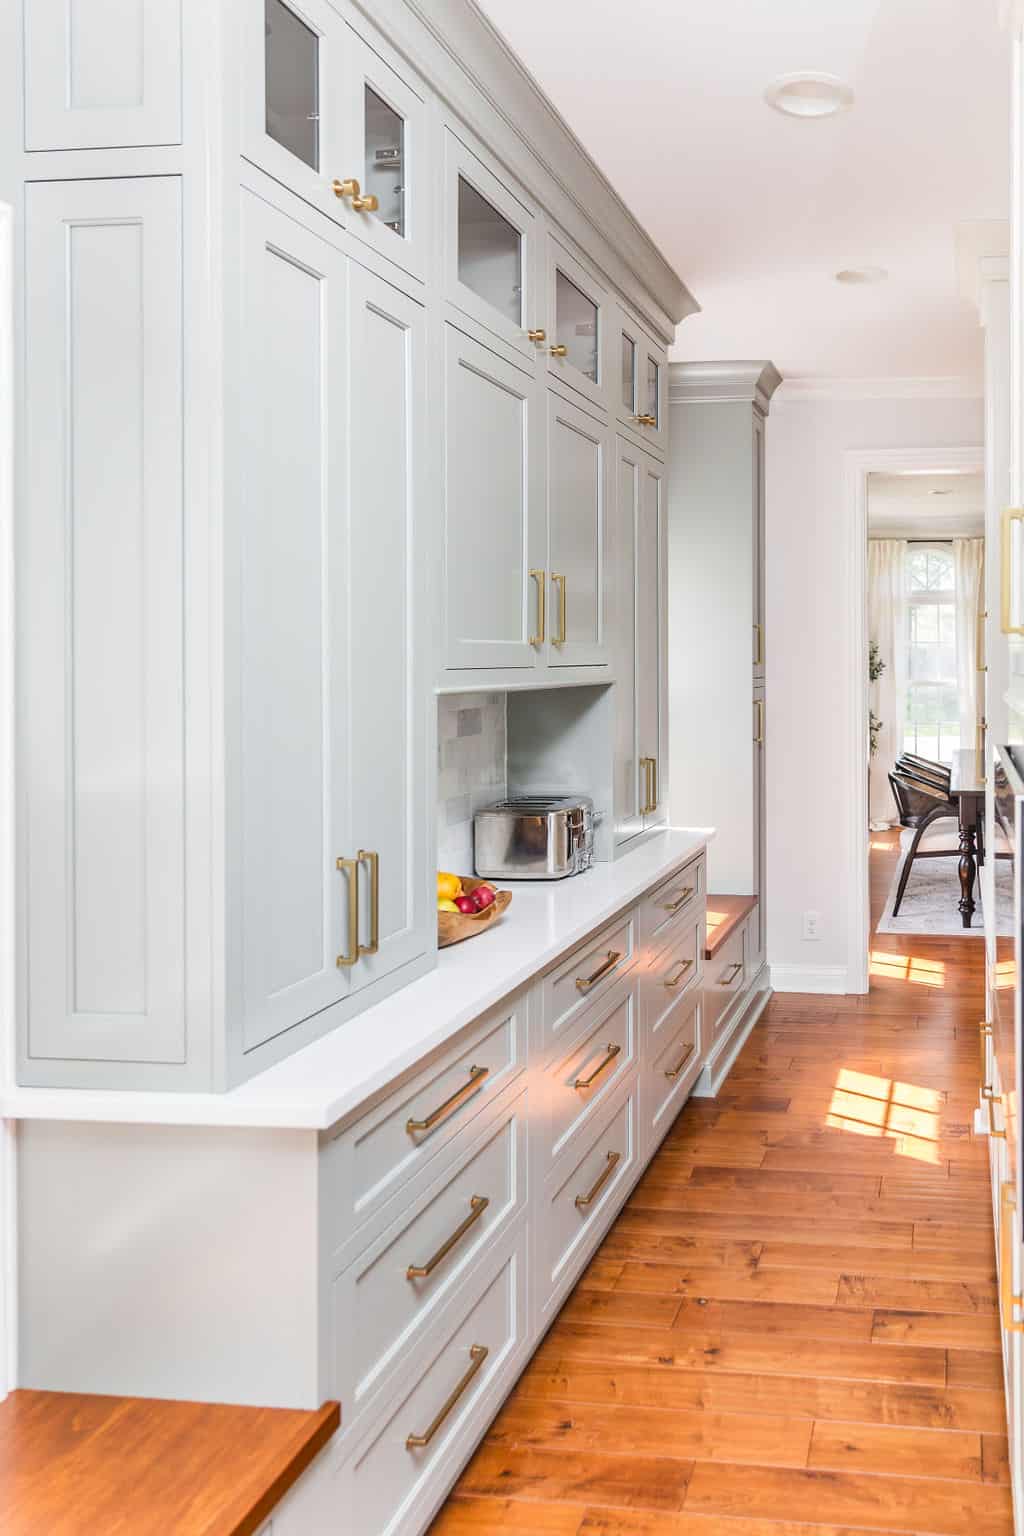 Nicholas Design Build | A kitchen remodel with white cabinets and hardwood floors.